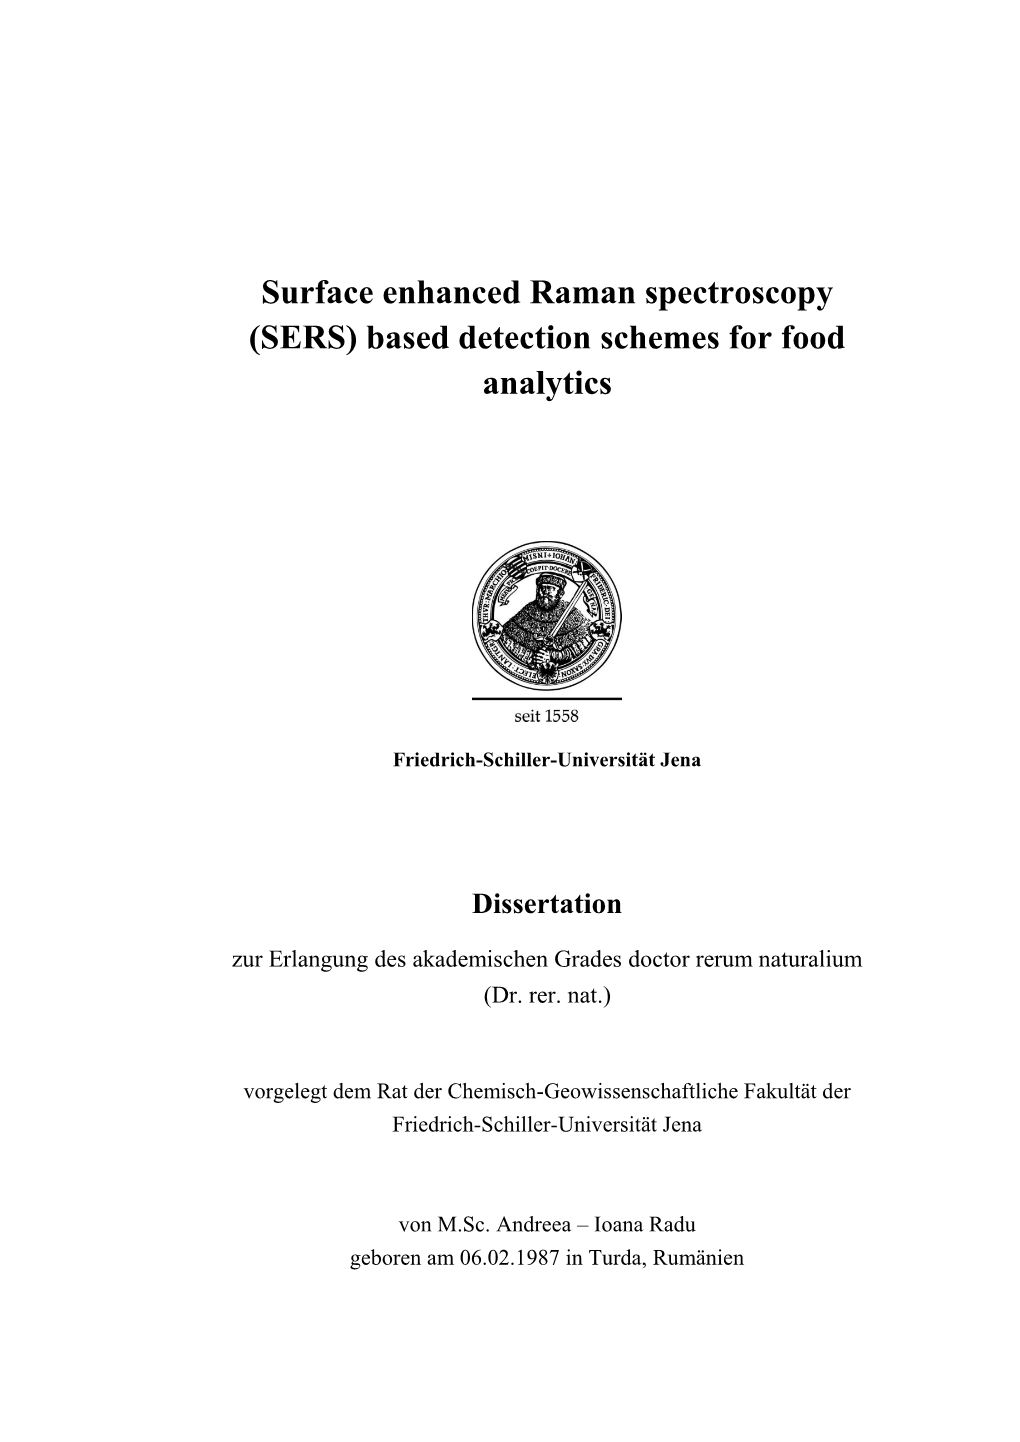 Surface Enhanced Raman Spectroscopy (SERS) Based Detection Schemes for Food Analytics